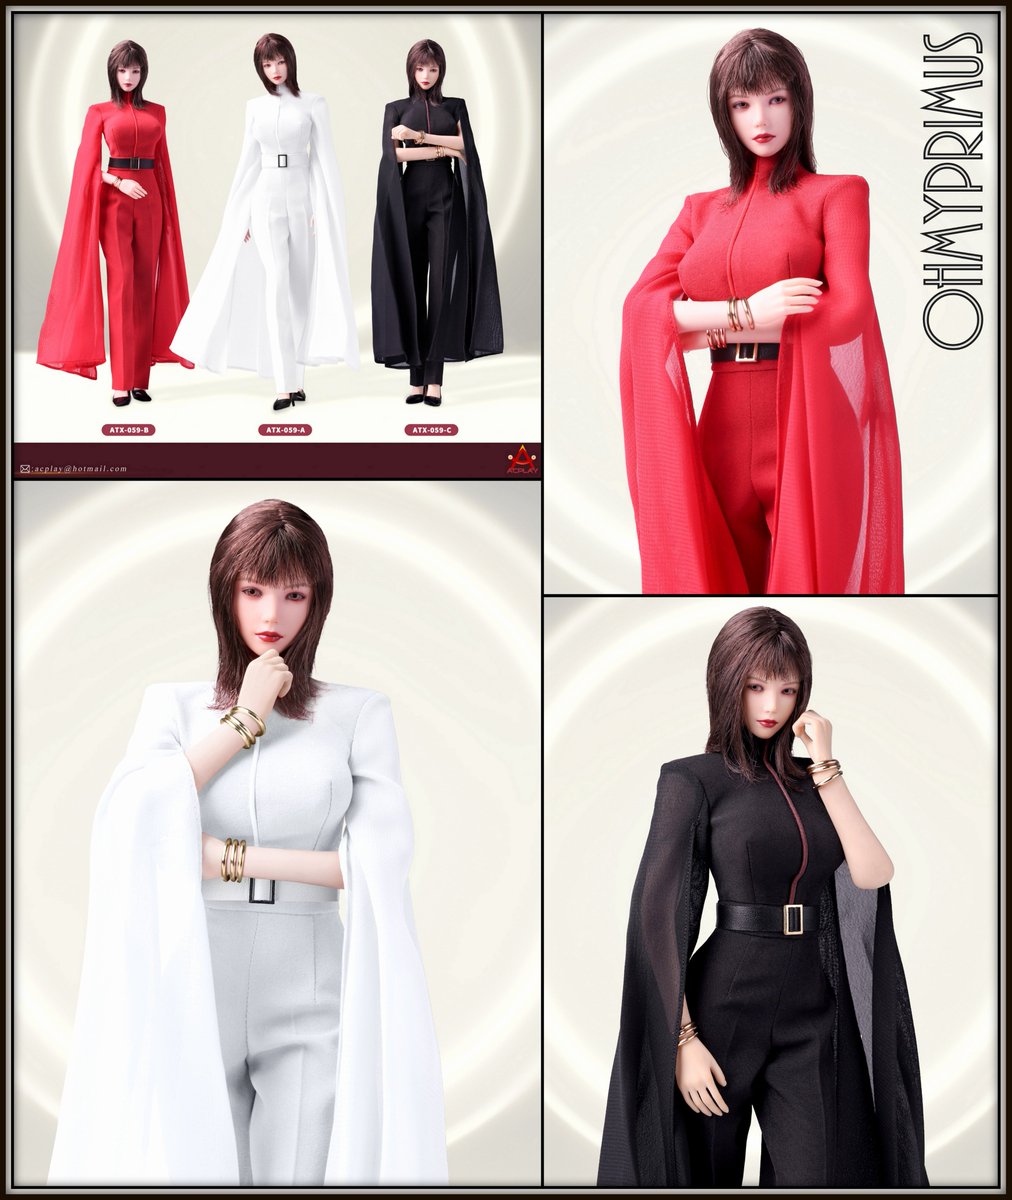 ⭐[𝗣𝗿𝗲-𝗼𝗿𝗱𝗲𝗿] ACPLAY 1/6 Scale Action Figure - ATX059-A/B/C Lady Evening Gown Set (Outfit Only) ⭐
ohmyprimus.com/acpatx059.html

#ohmyprimus #dewtoystore #onesixth #onesixthscale #onesixthfigure #actionfigure #actionfigures #customfigure #designertoy #popculture #eveninggown